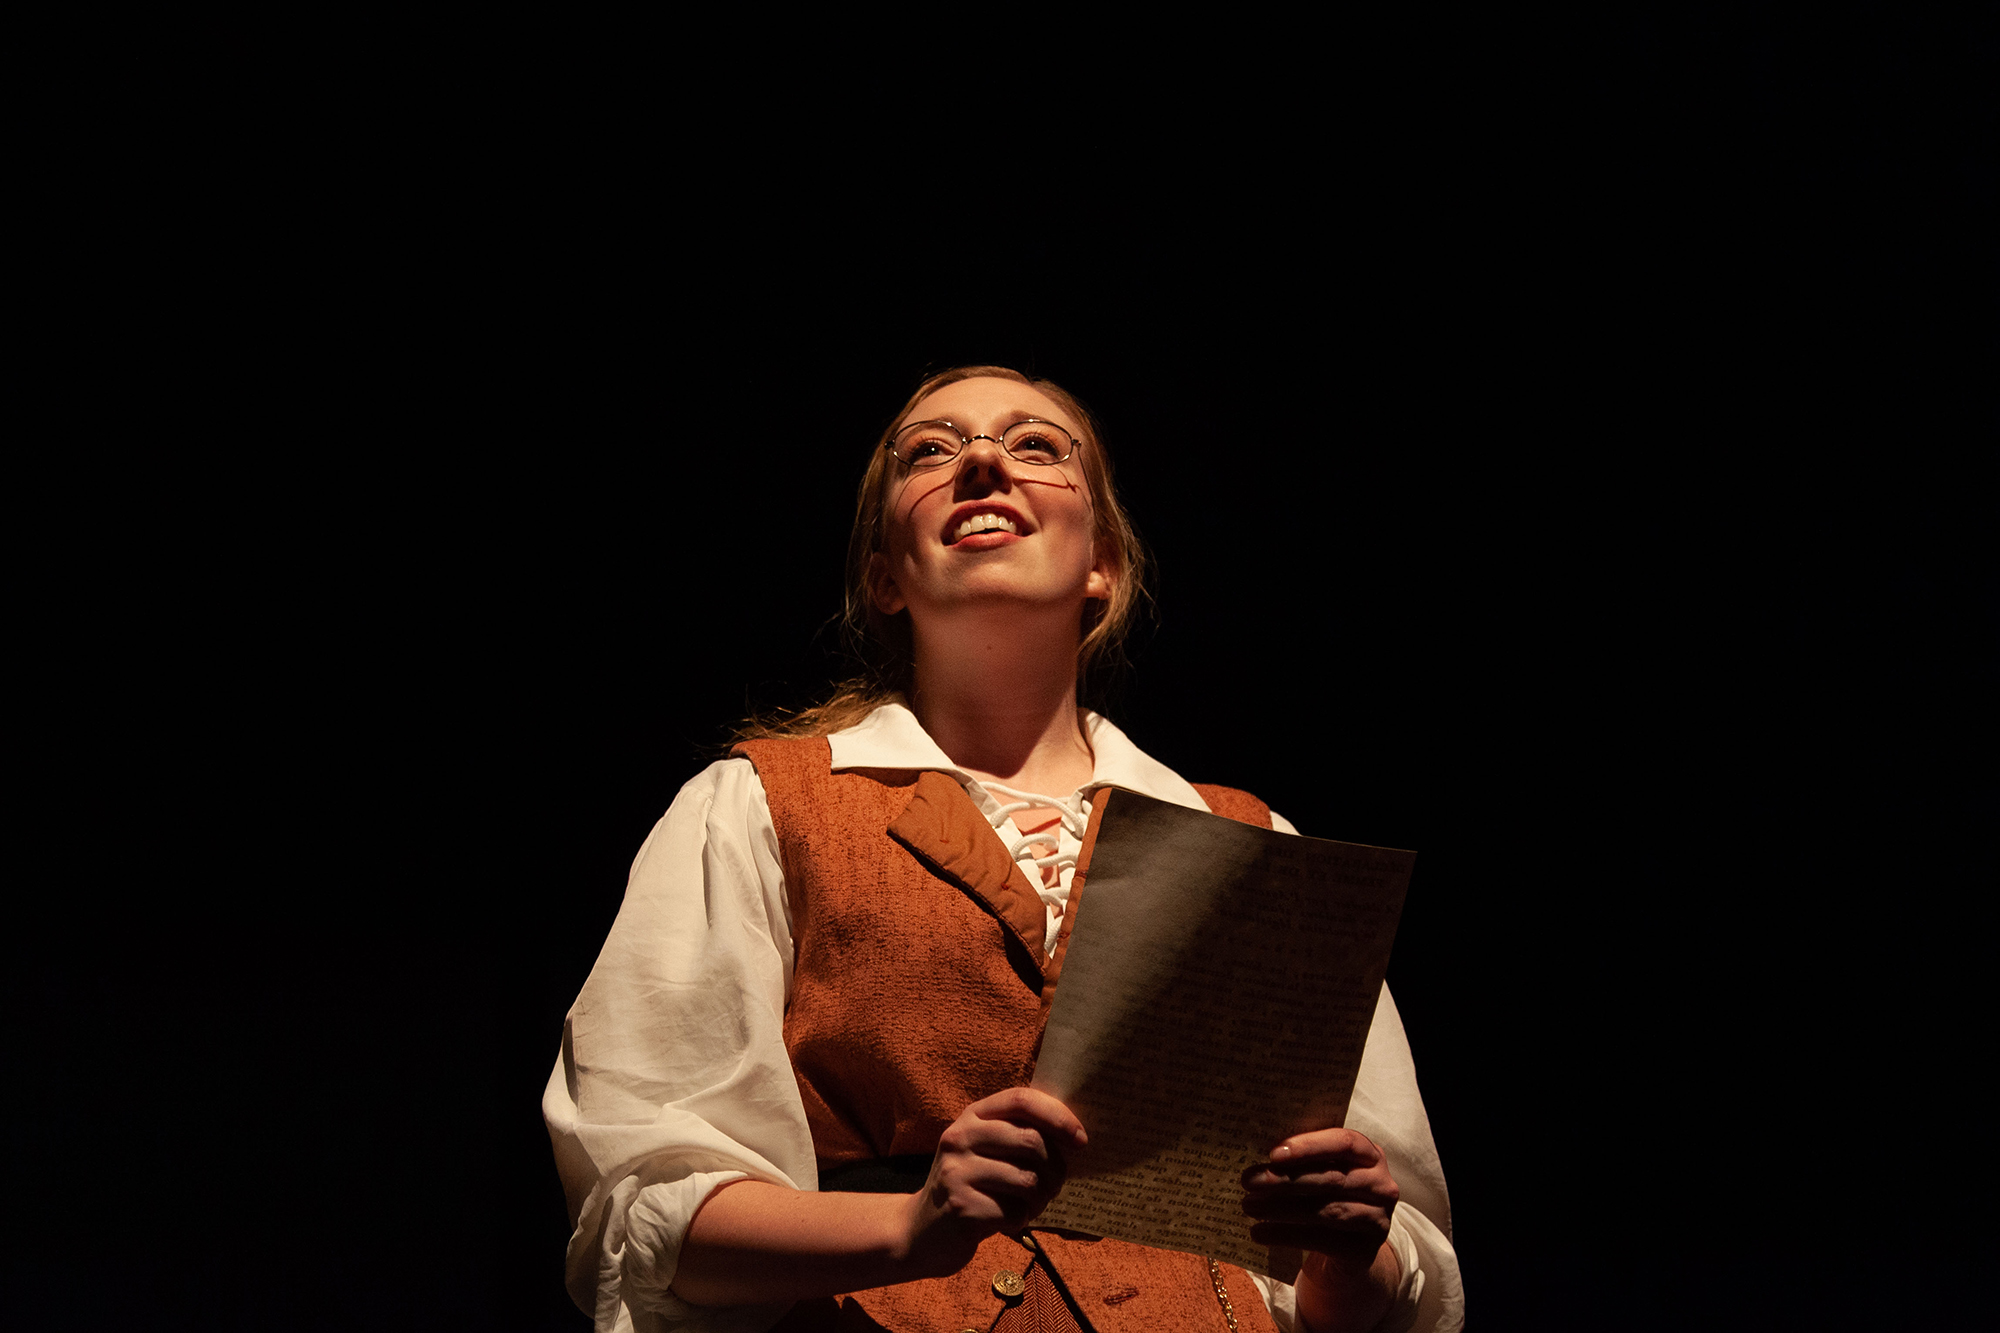 This is a photo of an actor performing in a play, holding a letter